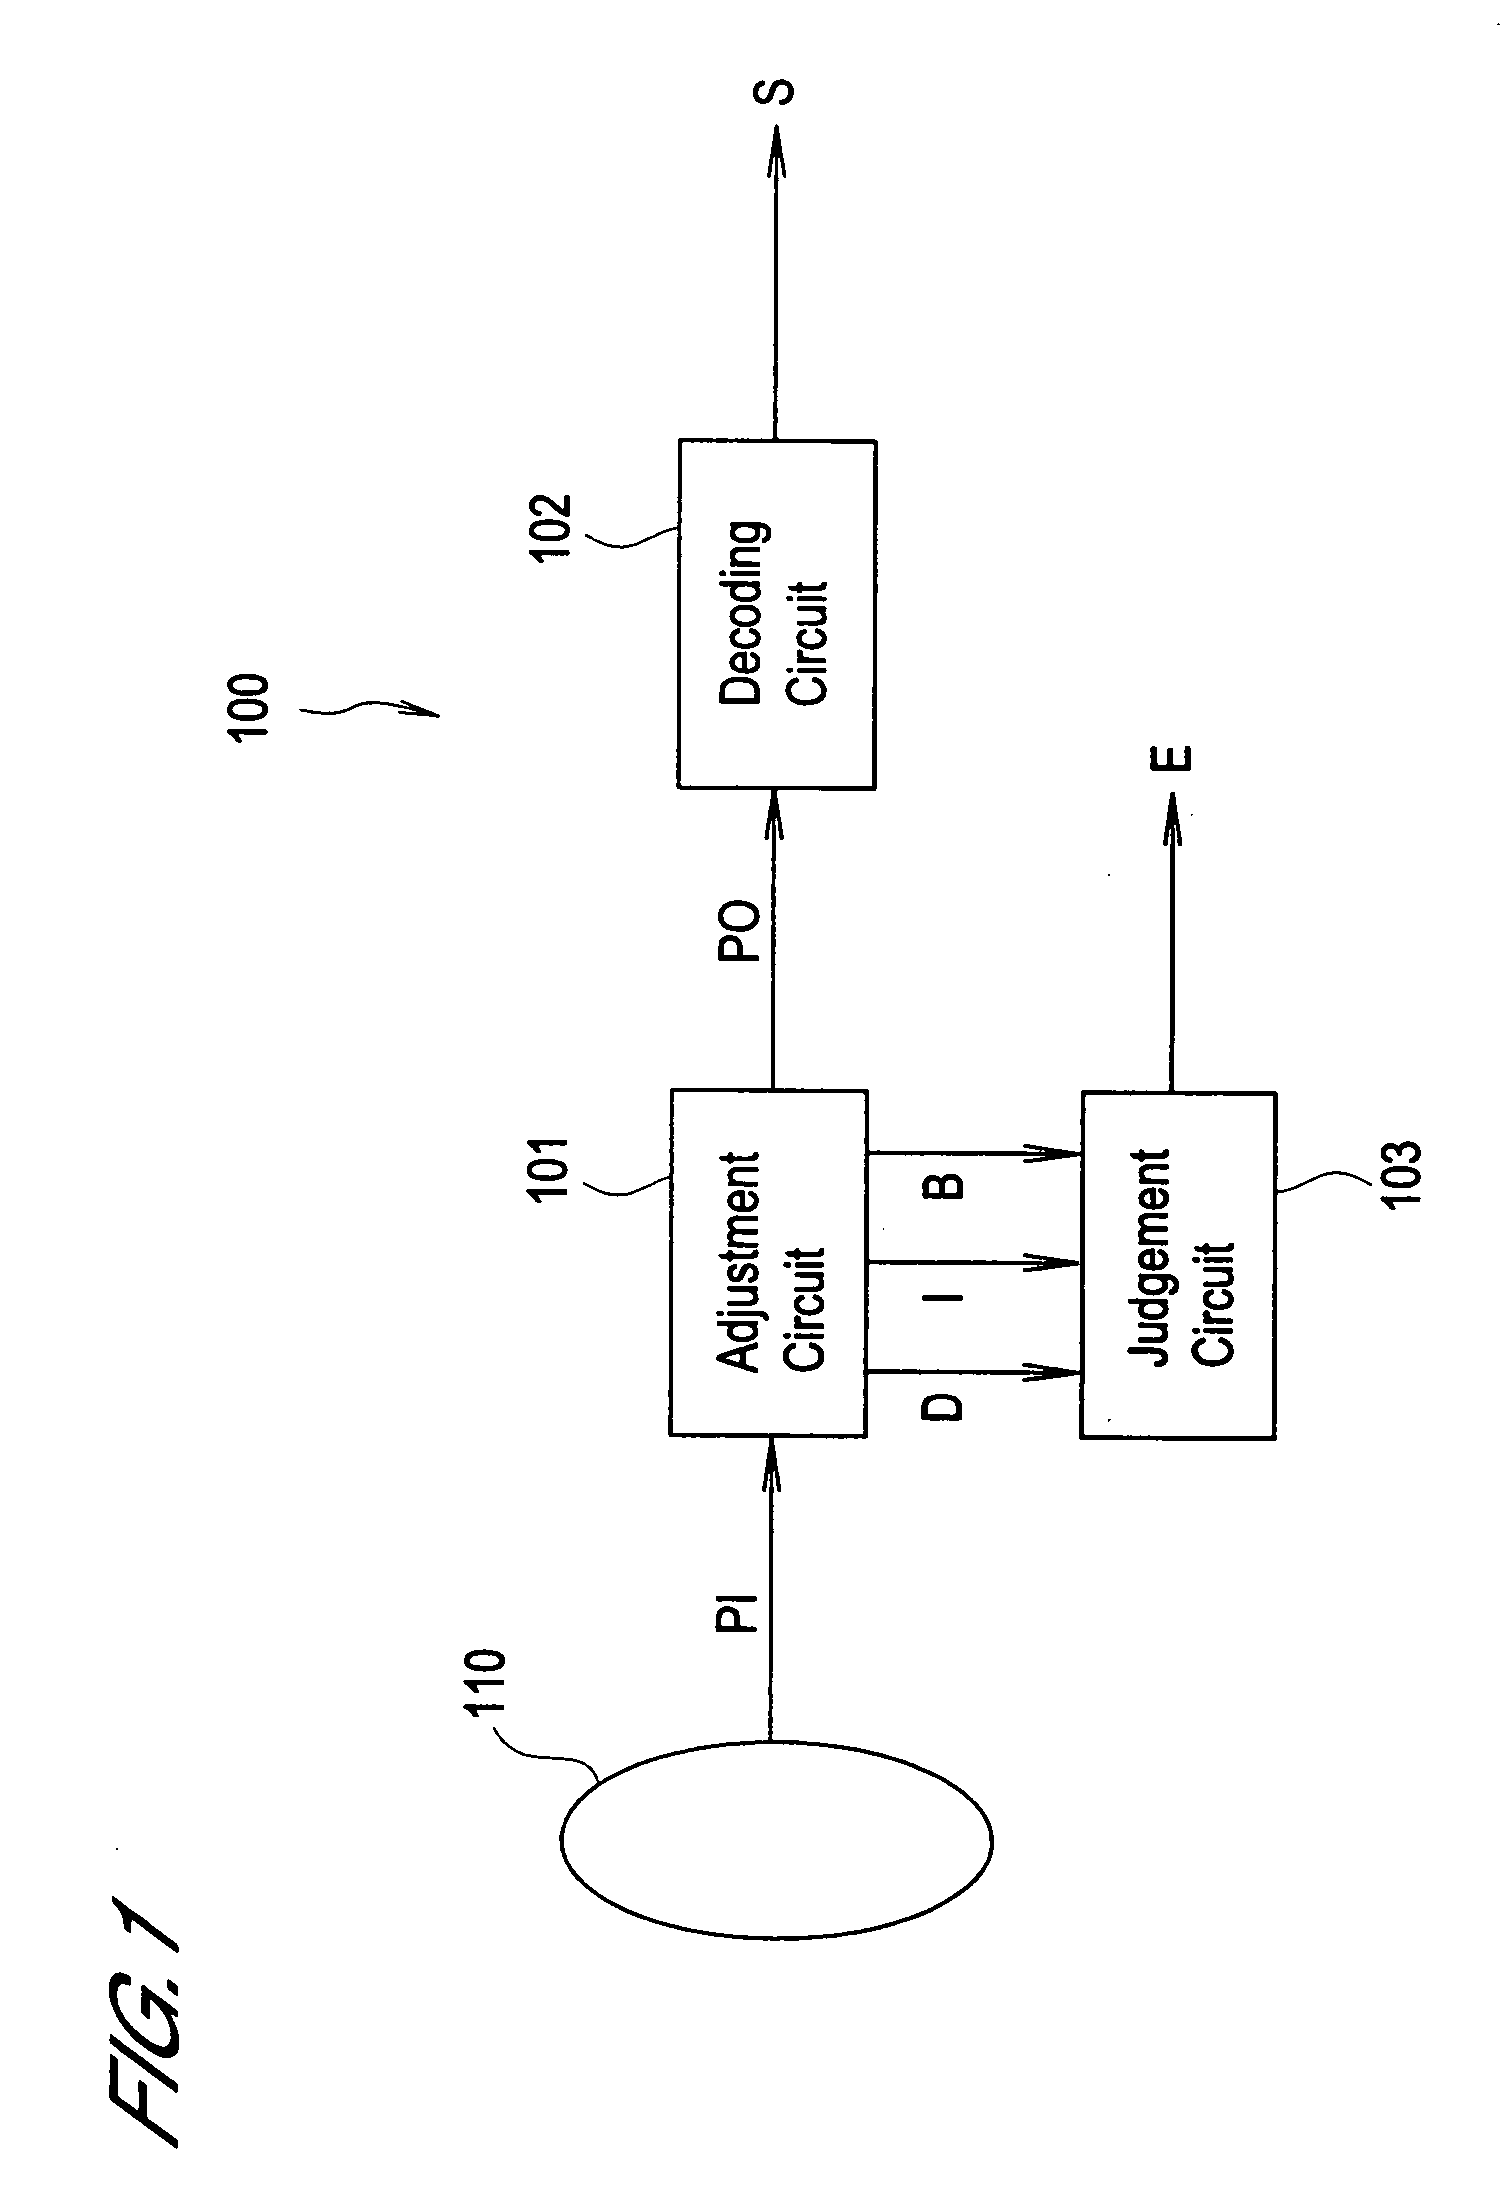 Voice packet communications system with communications quality evaluation function